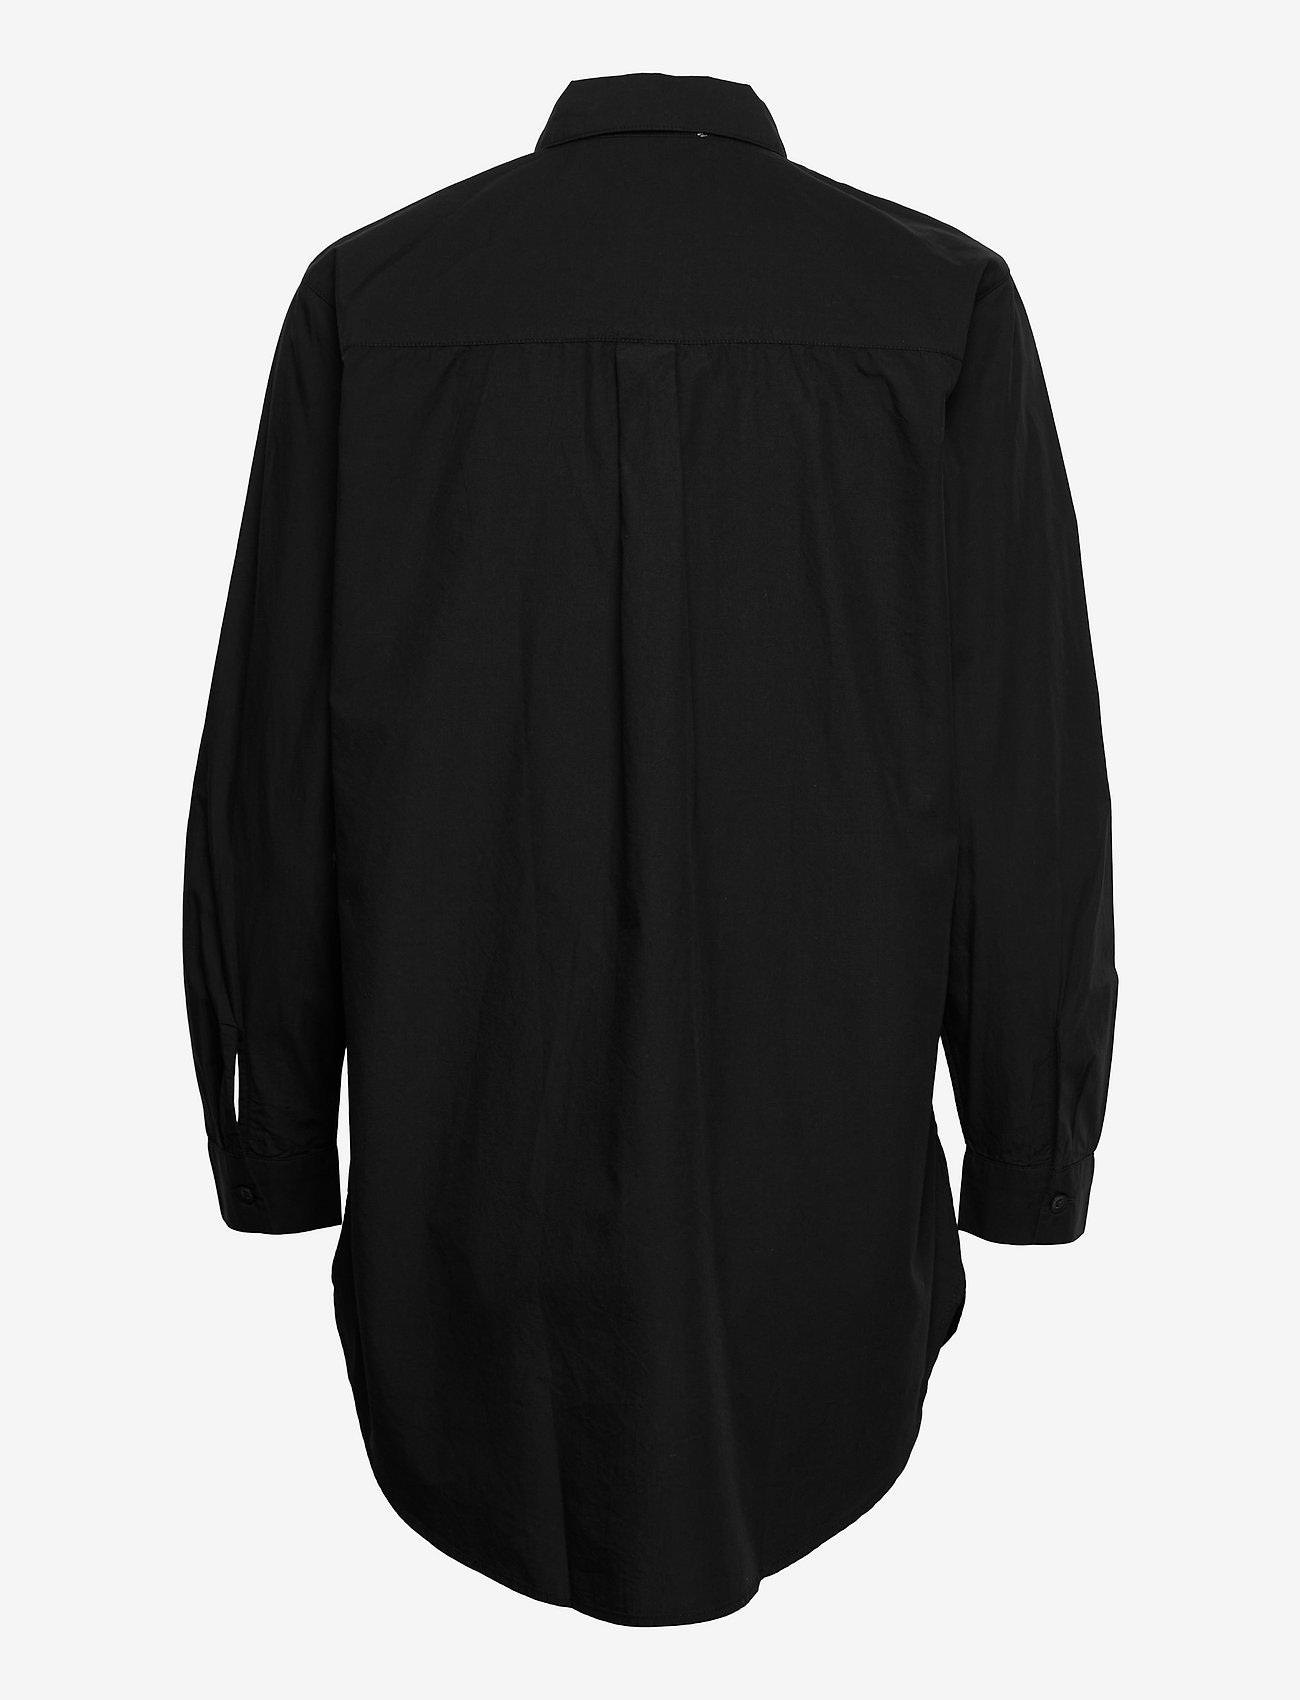 Esprit Casual - Long blouse made of 100% organic cotton - long-sleeved shirts - black - 1